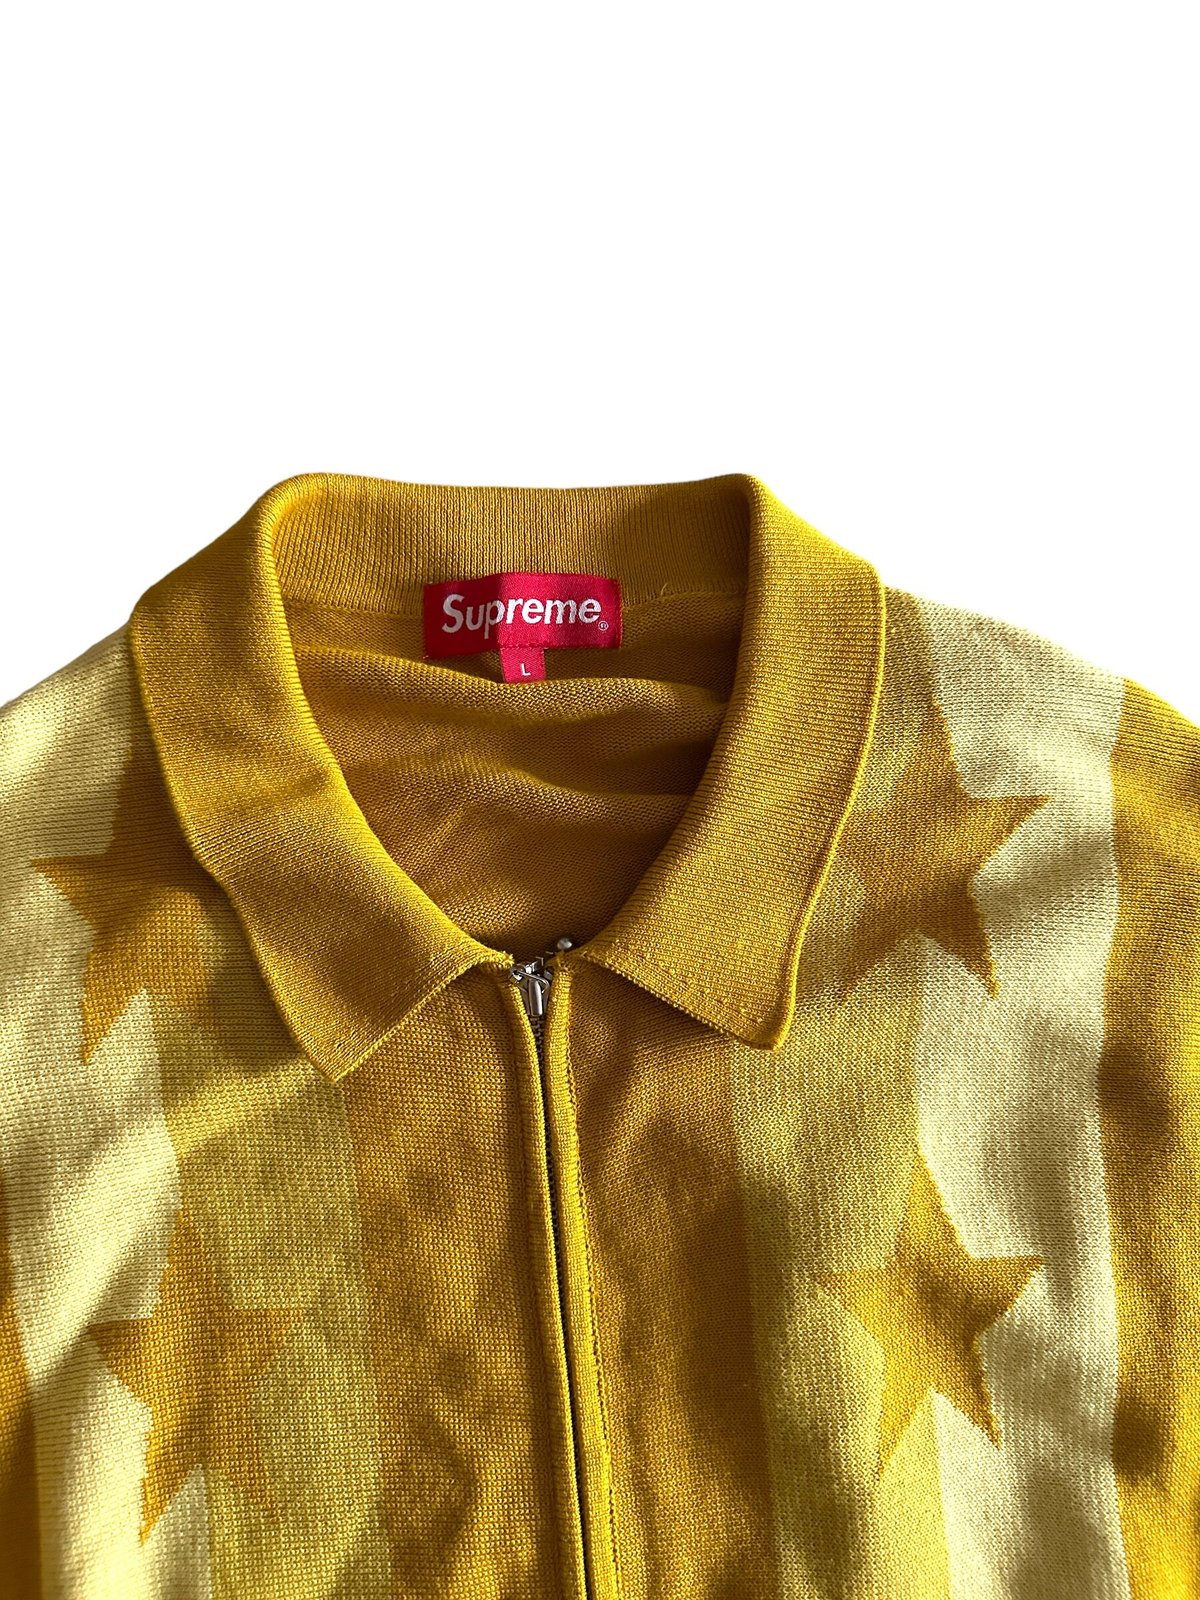 Stars Zip Up Sweater Polo by Supreme